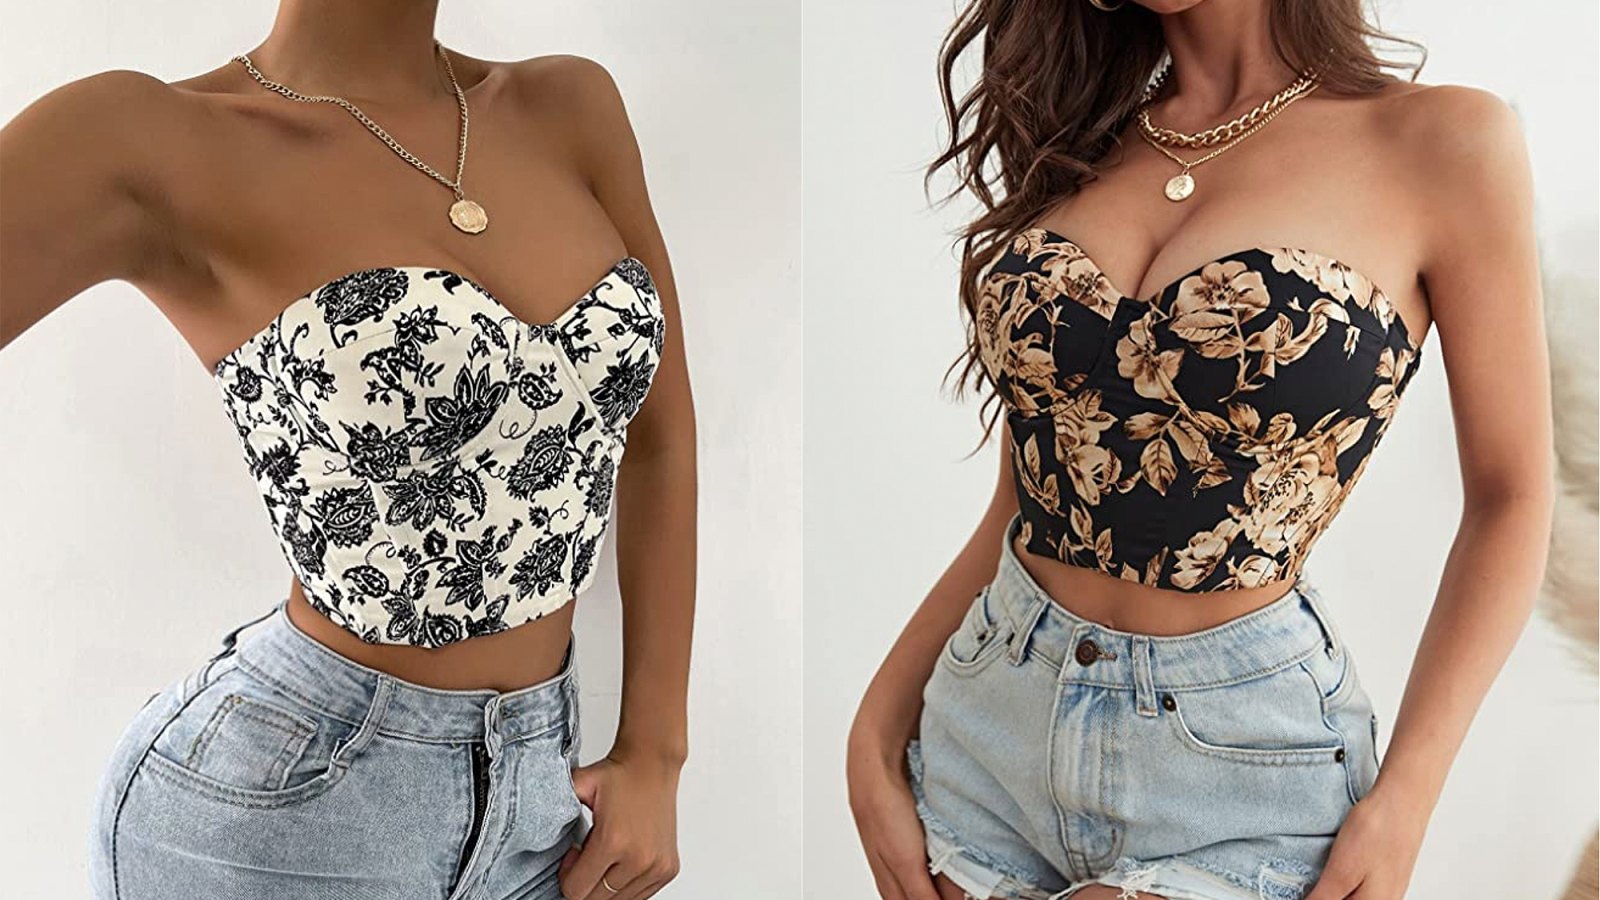 SOLY HUX Bustier Top Will Give You a Perfect Cinched-In Look